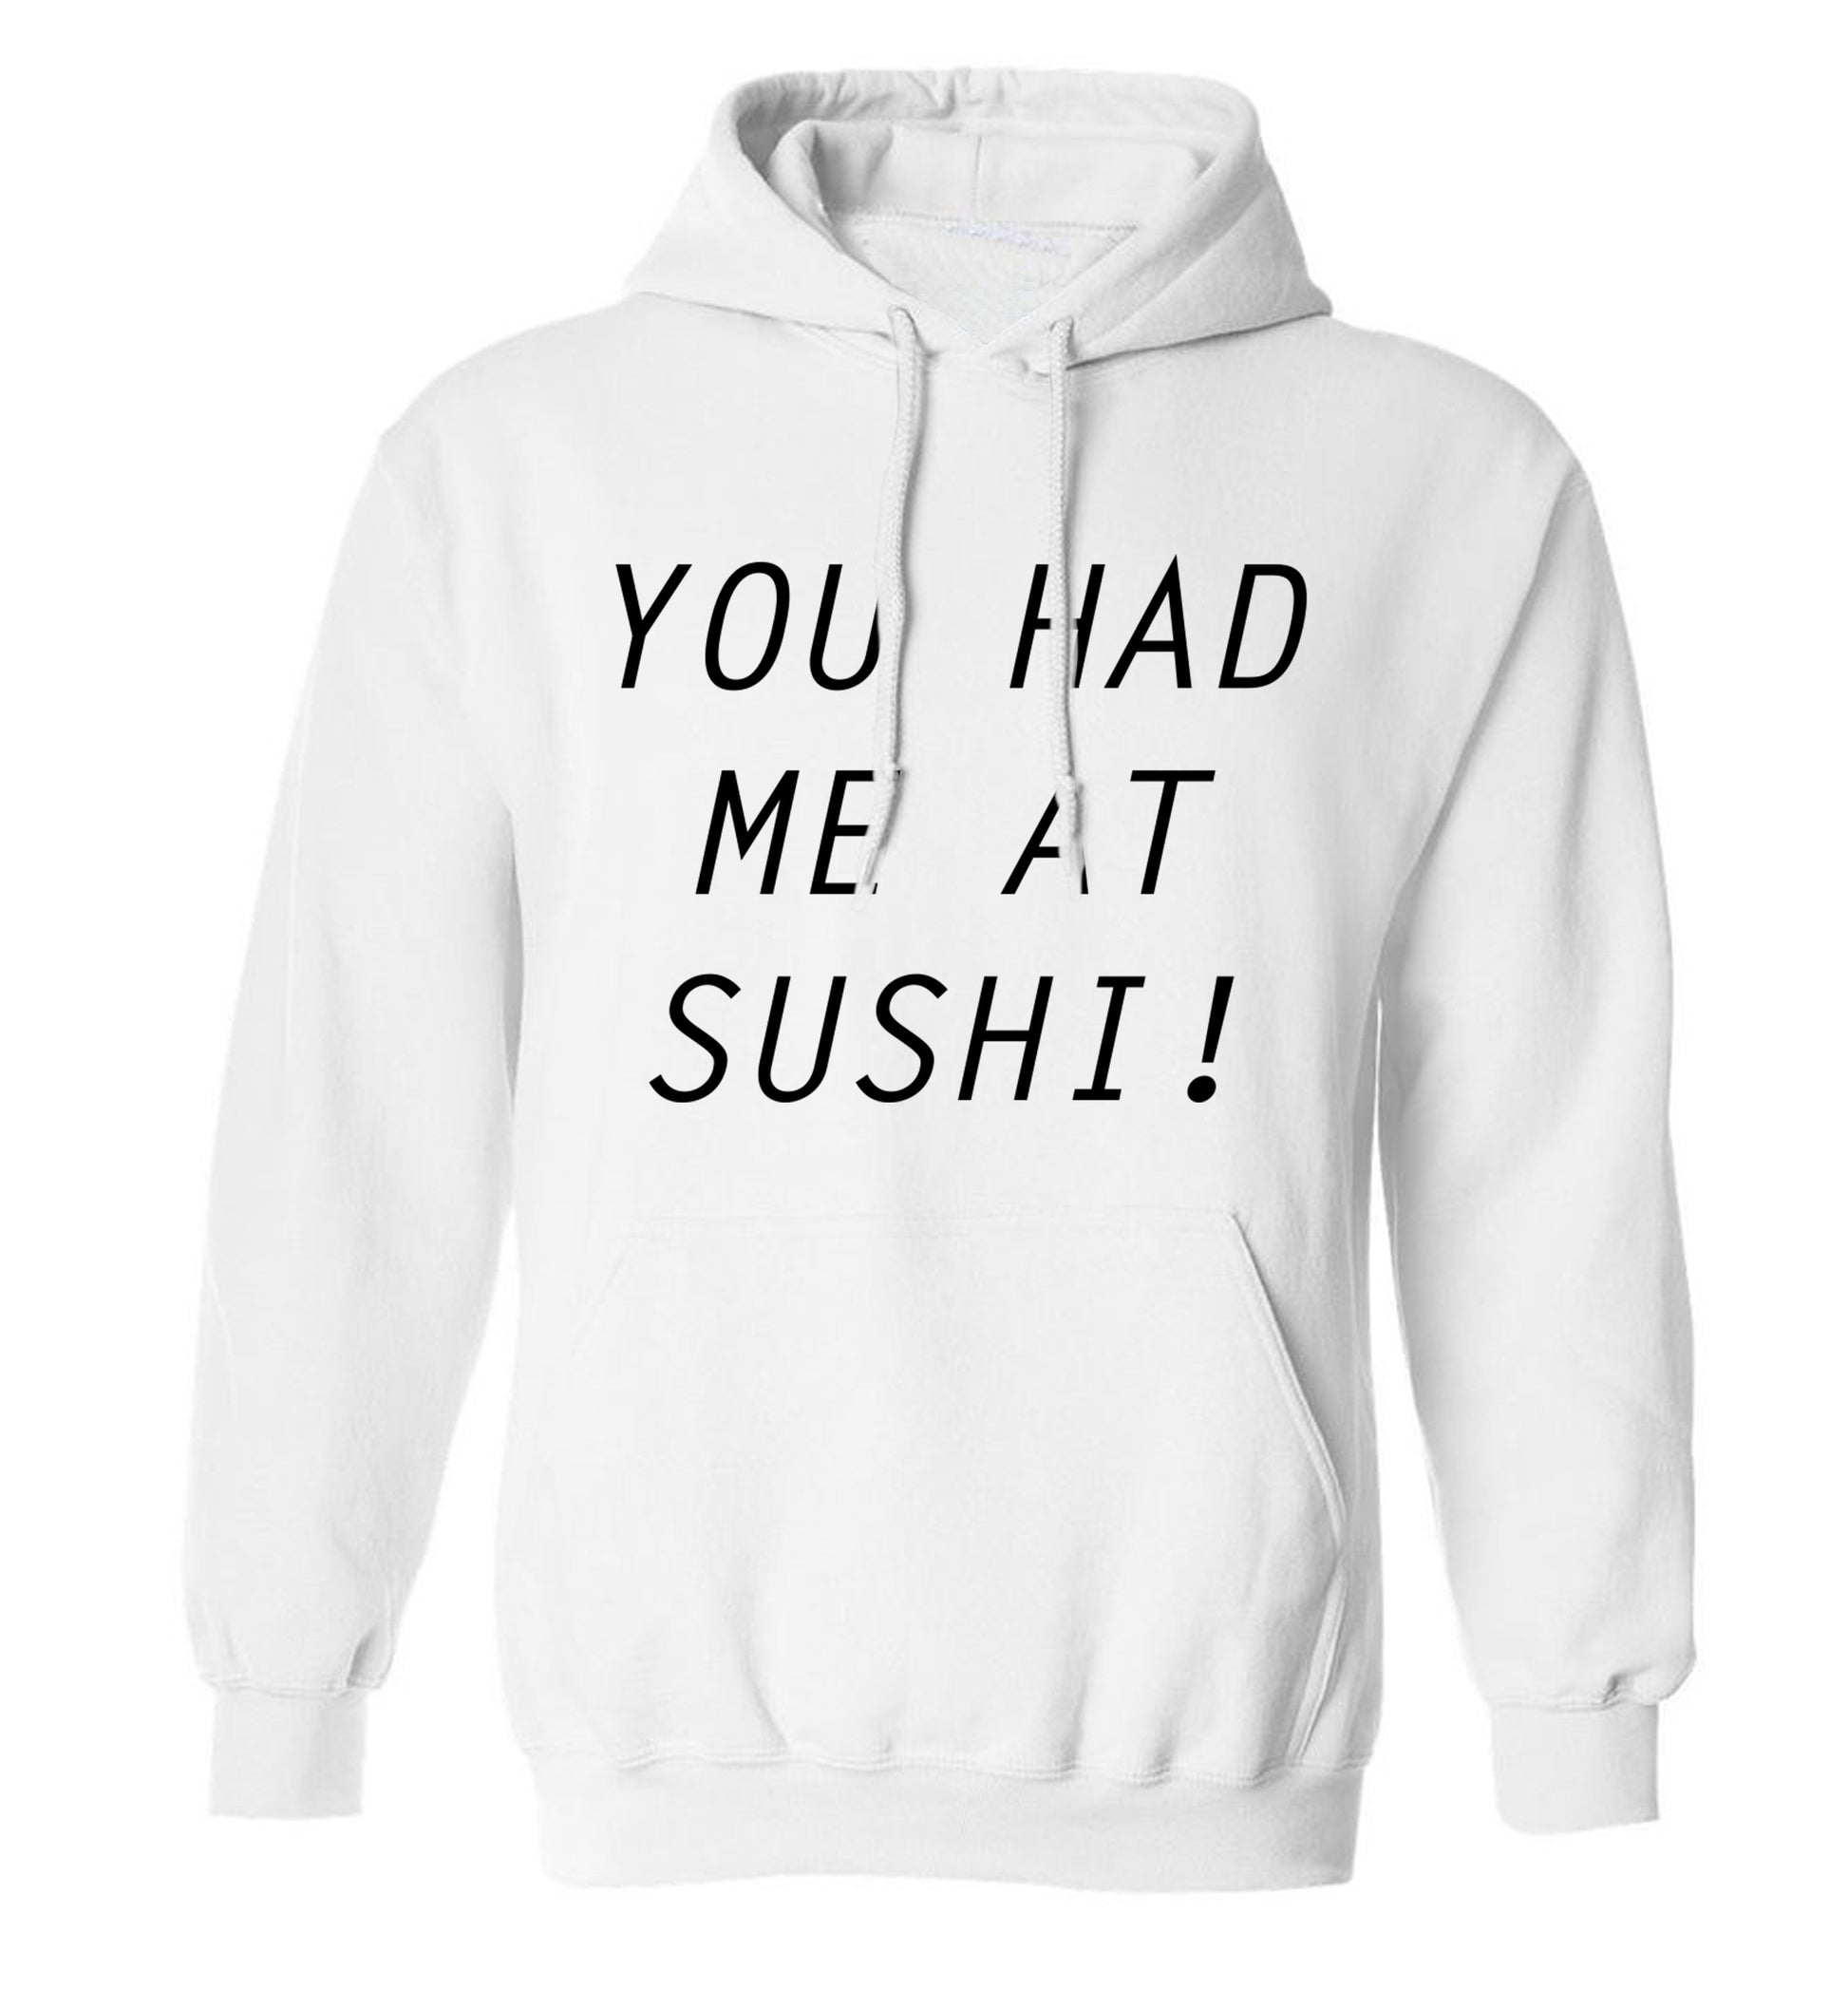 You had me at sushi adults unisex white hoodie 2XL